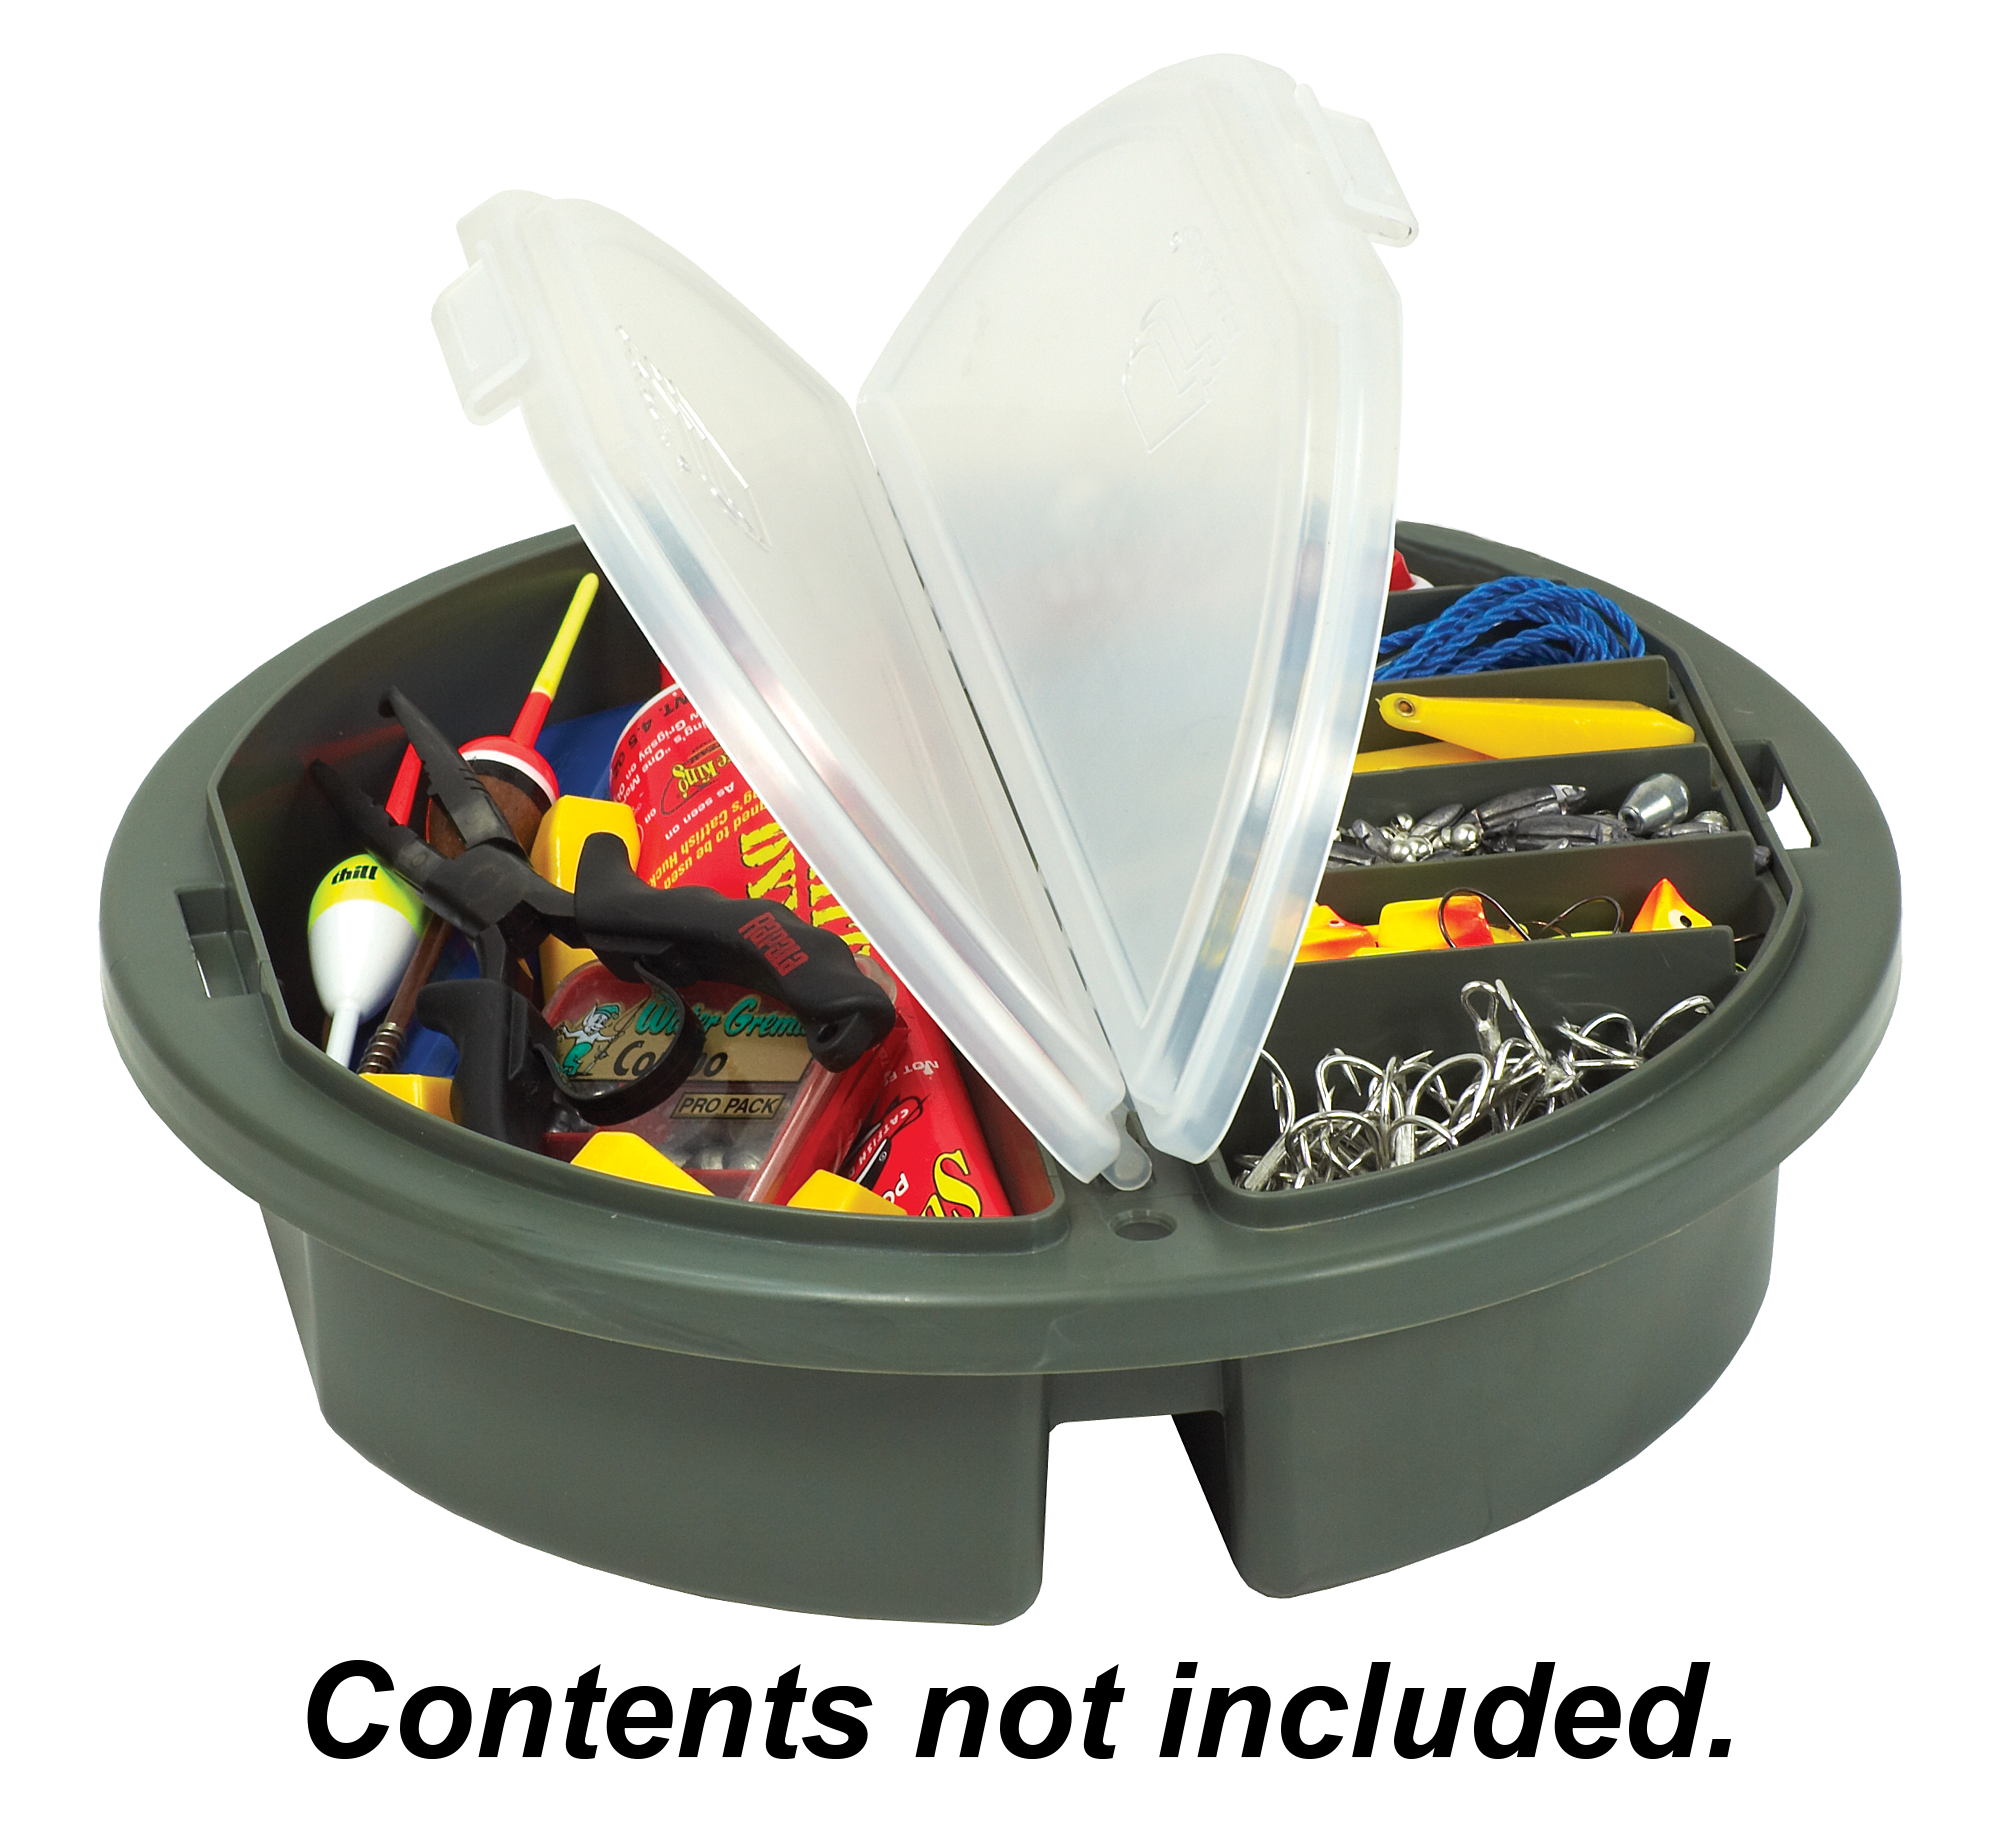 Shiflett Fishing Extreme Bucket with Braided Carrying Rope